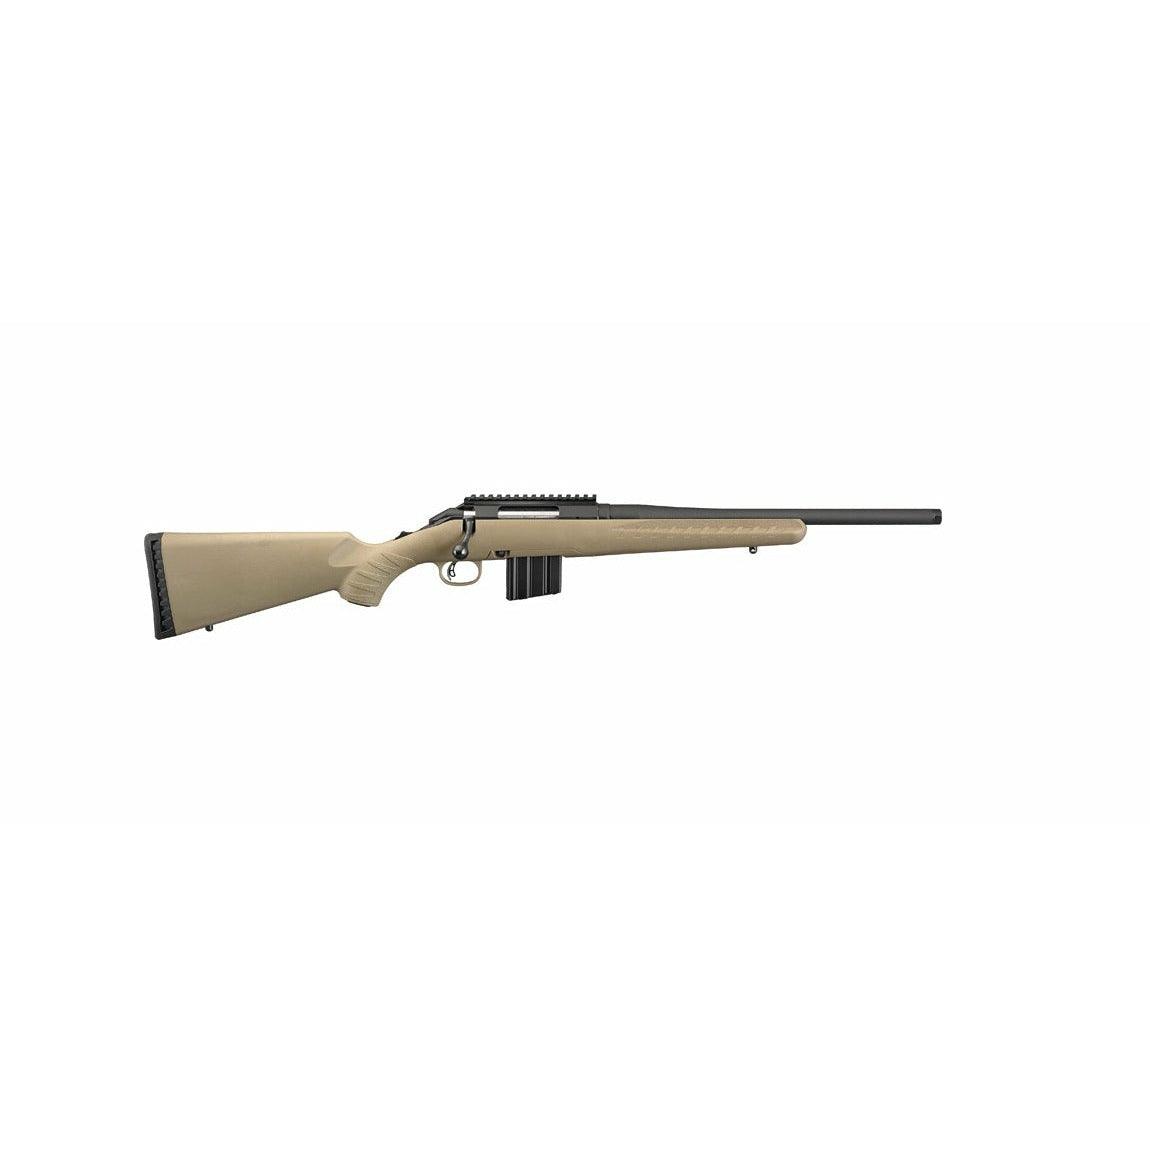 RUGER AMERICAN RANCH 223 22 AR STYLE 10 SHOT MAG - Horizon Leisure